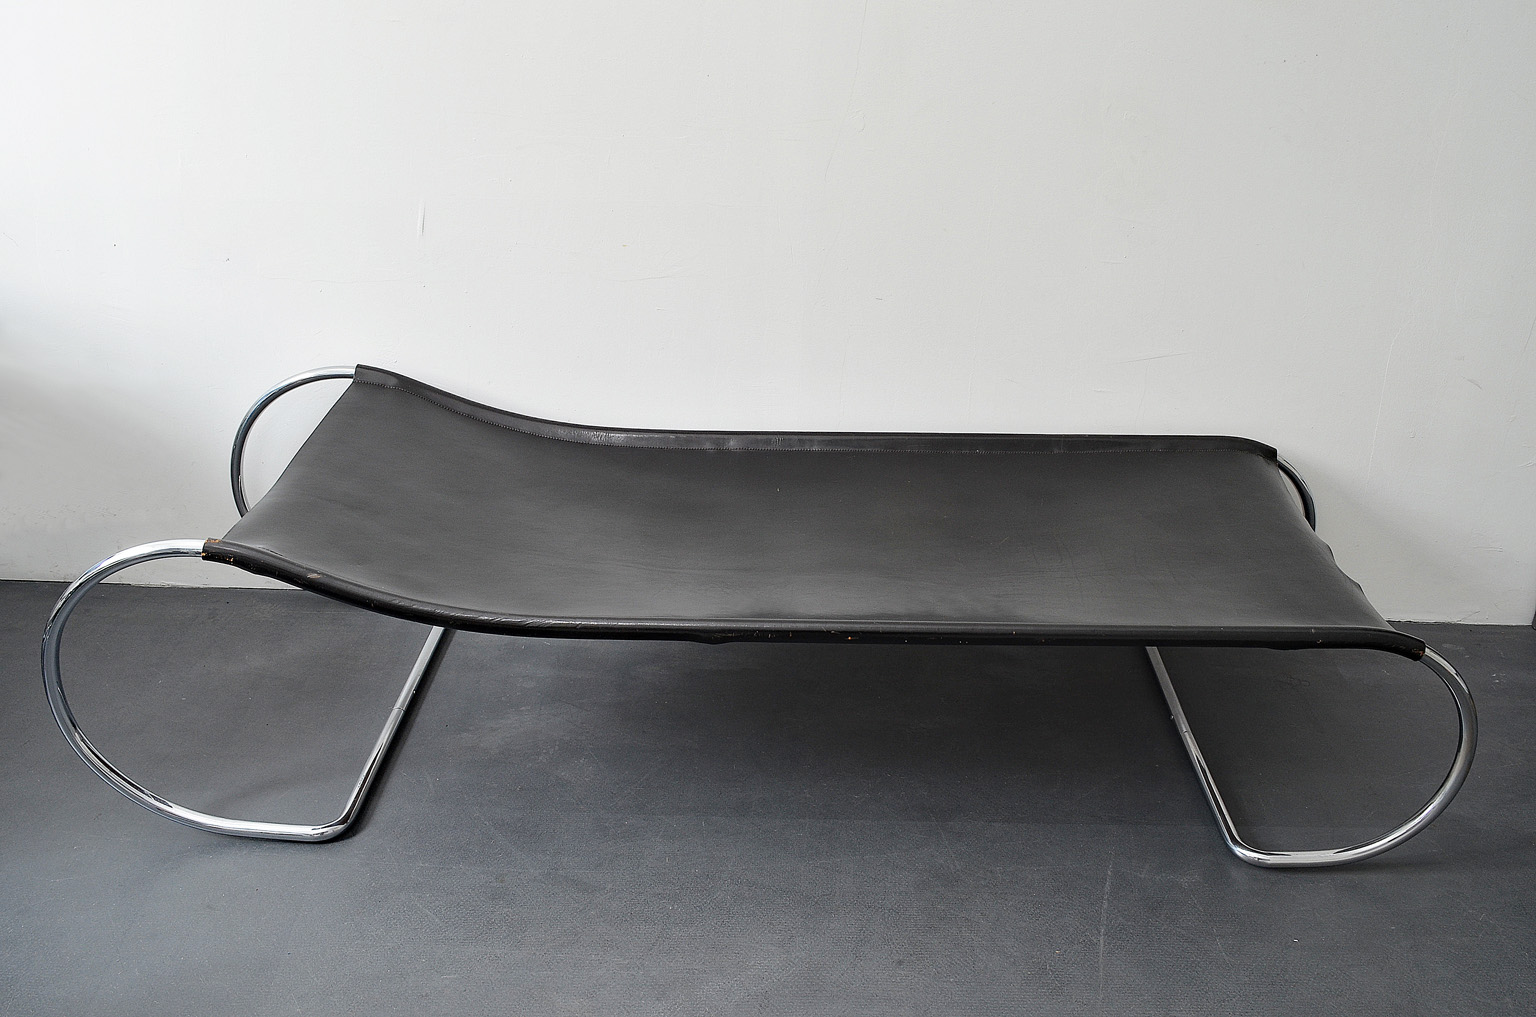 LS 22″ Couch / Chaise designed 1931 by Anton Lorenz.  Tubular Steel and Leather made by Thonet.  Anton Lorenz 1891-1964 Ungarn.